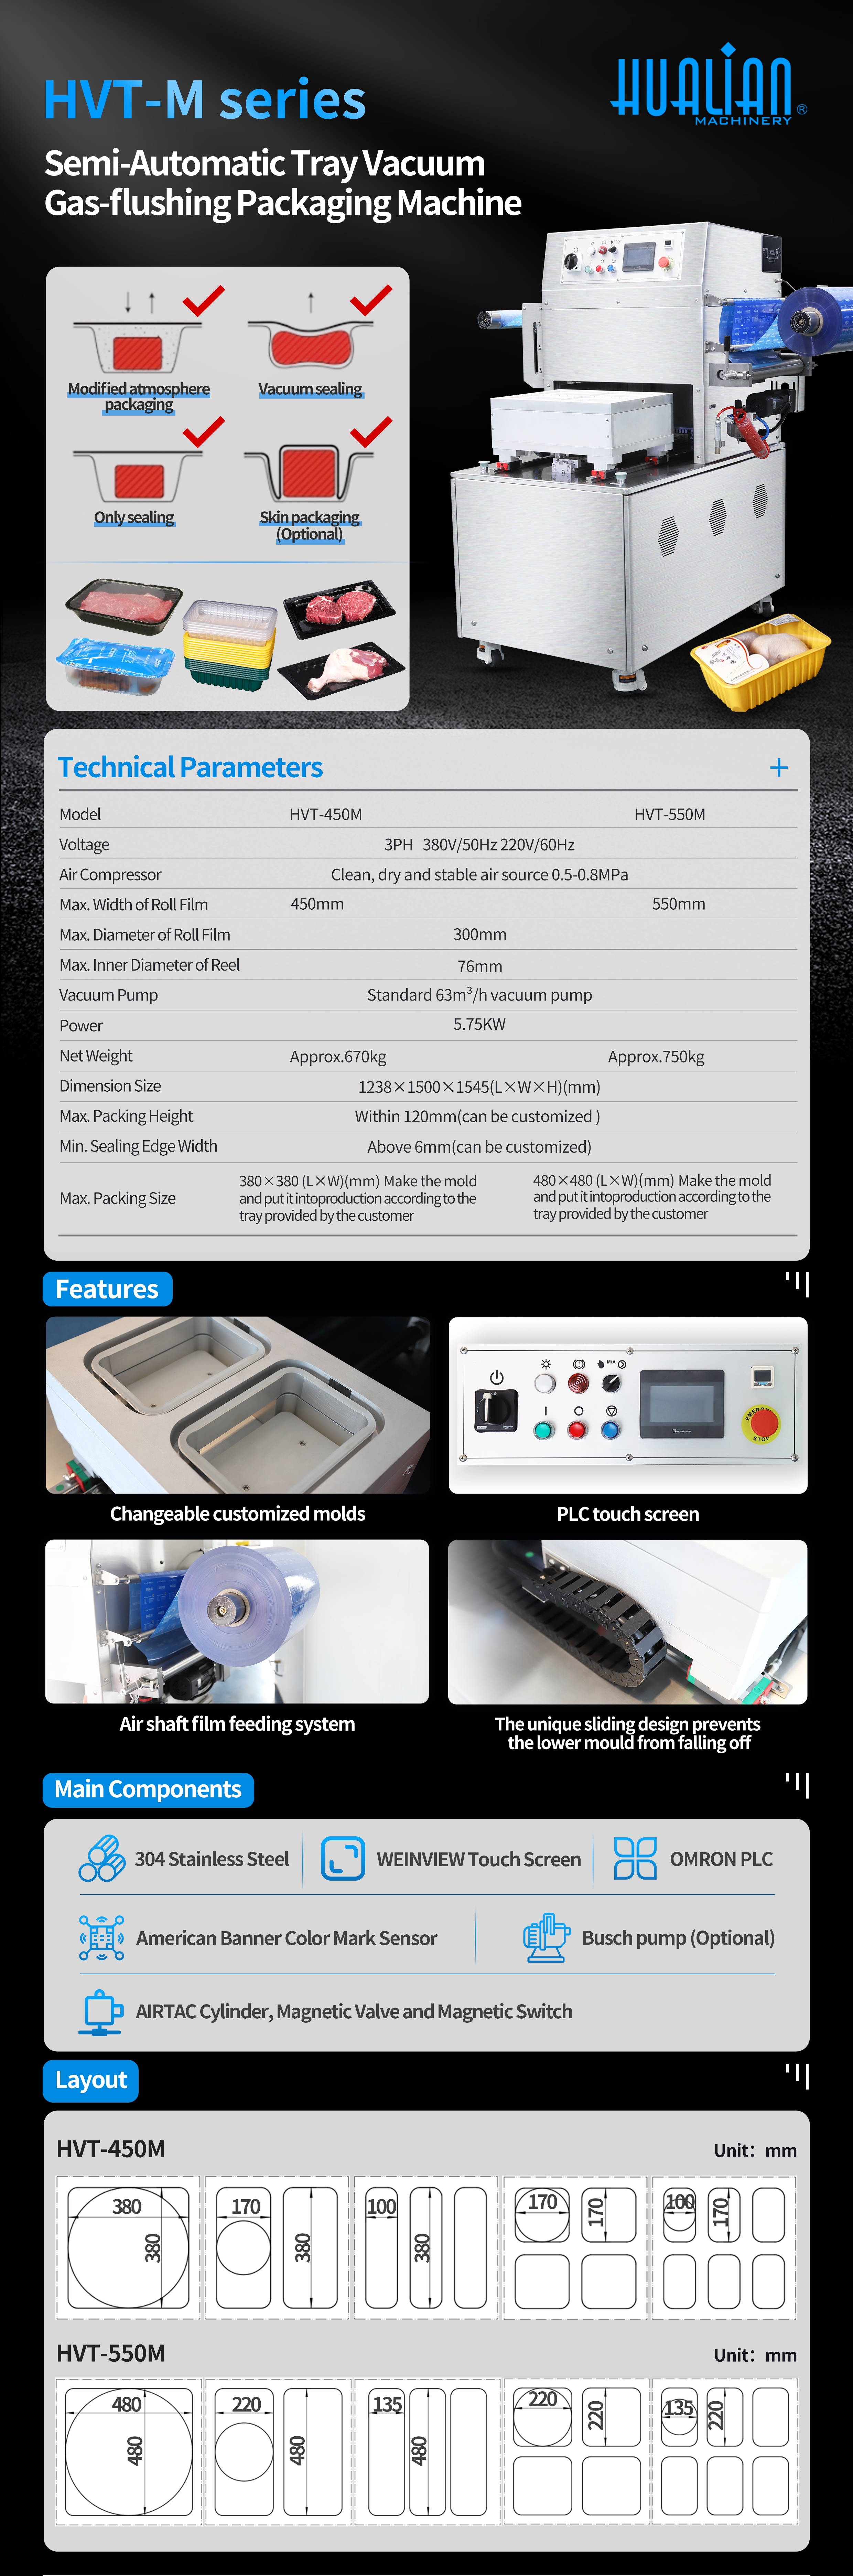 Nitrogen Professional Food Vacuum Chamber Sealer HVC-510T/2A from China  manufacturer - Hualian Machinery Group